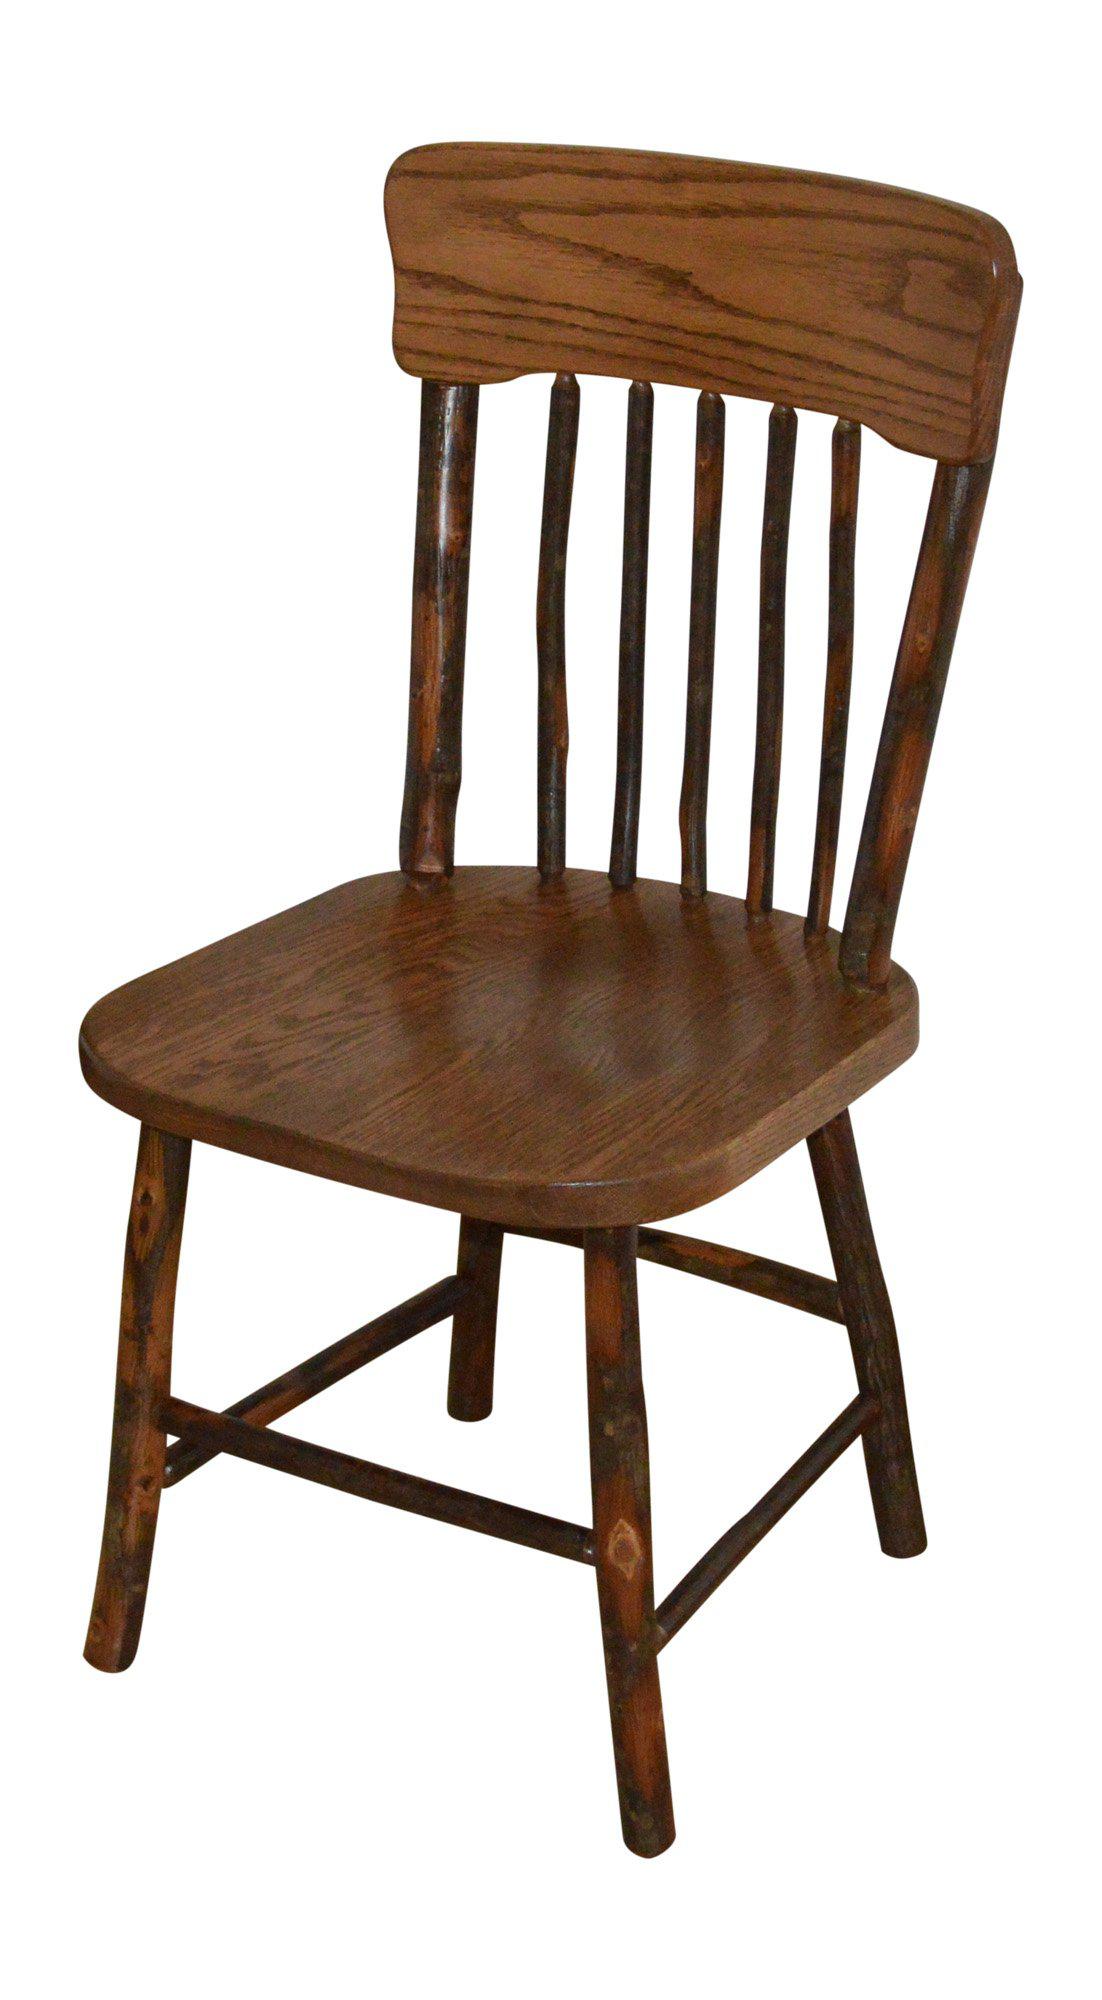 A&L Furniture Co. Amish Hickory Panel Back Dining Chair - LEAD TIME TO SHIP 10 BUSINESS DAYS